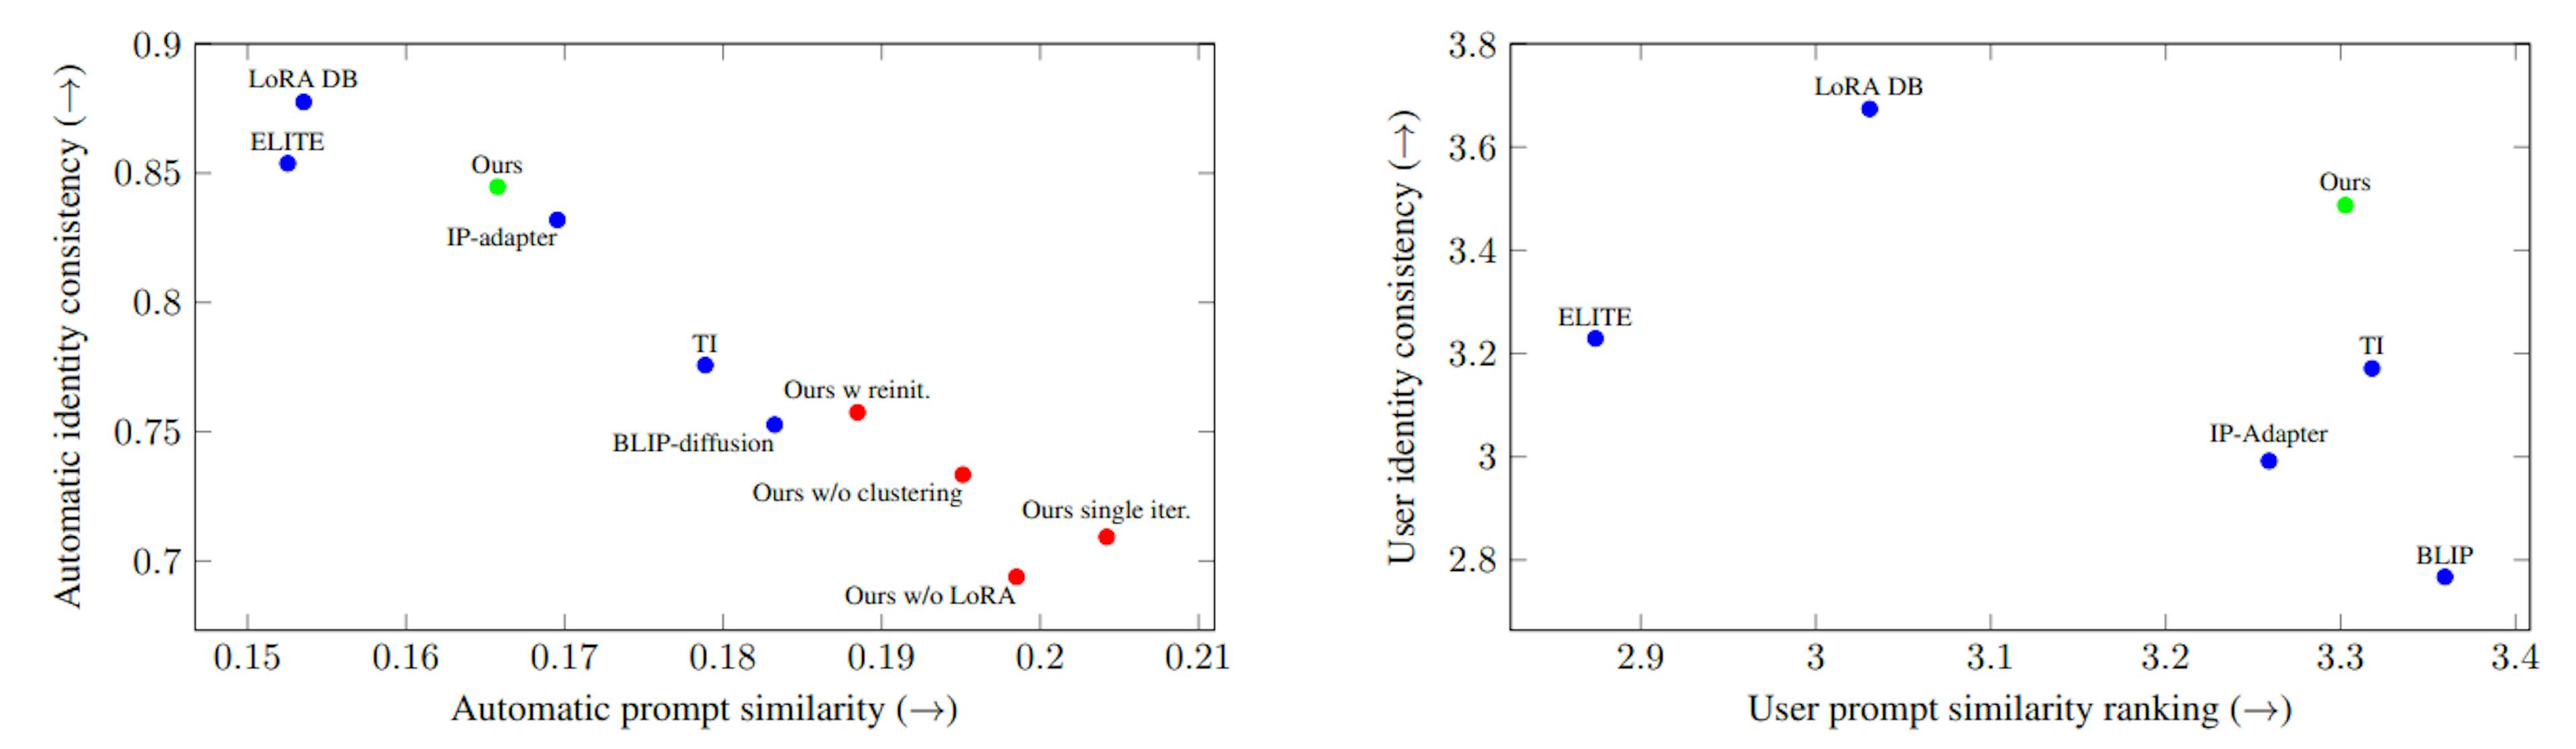 Figure 6. Quantitative Comparison and User Study. (Left) We compared our method quantitatively with various baselines in terms of identity consistency and prompt similarity, as explained in Section 4.1. LoRA DB and ELITE maintain high identity consistency, while sacrificing prompt similarity. TI and BLIP-diffusion achieve high prompt similarity but low identity consistency. Our method and IPadapter both lie on the Pareto front, but the better identity consistency of our method is perceptually significant, as demonstrated in the user study. We also ablated some components of our method: removing the clustering stage, reducing the optimizable representation, re-initializing the representation in each iteration and performing only a single iteration. All of the ablated cases resulted in a significant degradation of consistency. (Right) The user study rankings also demonstrate that our method lies on the Pareto front, balancing between identity consistency and prompt similarity.